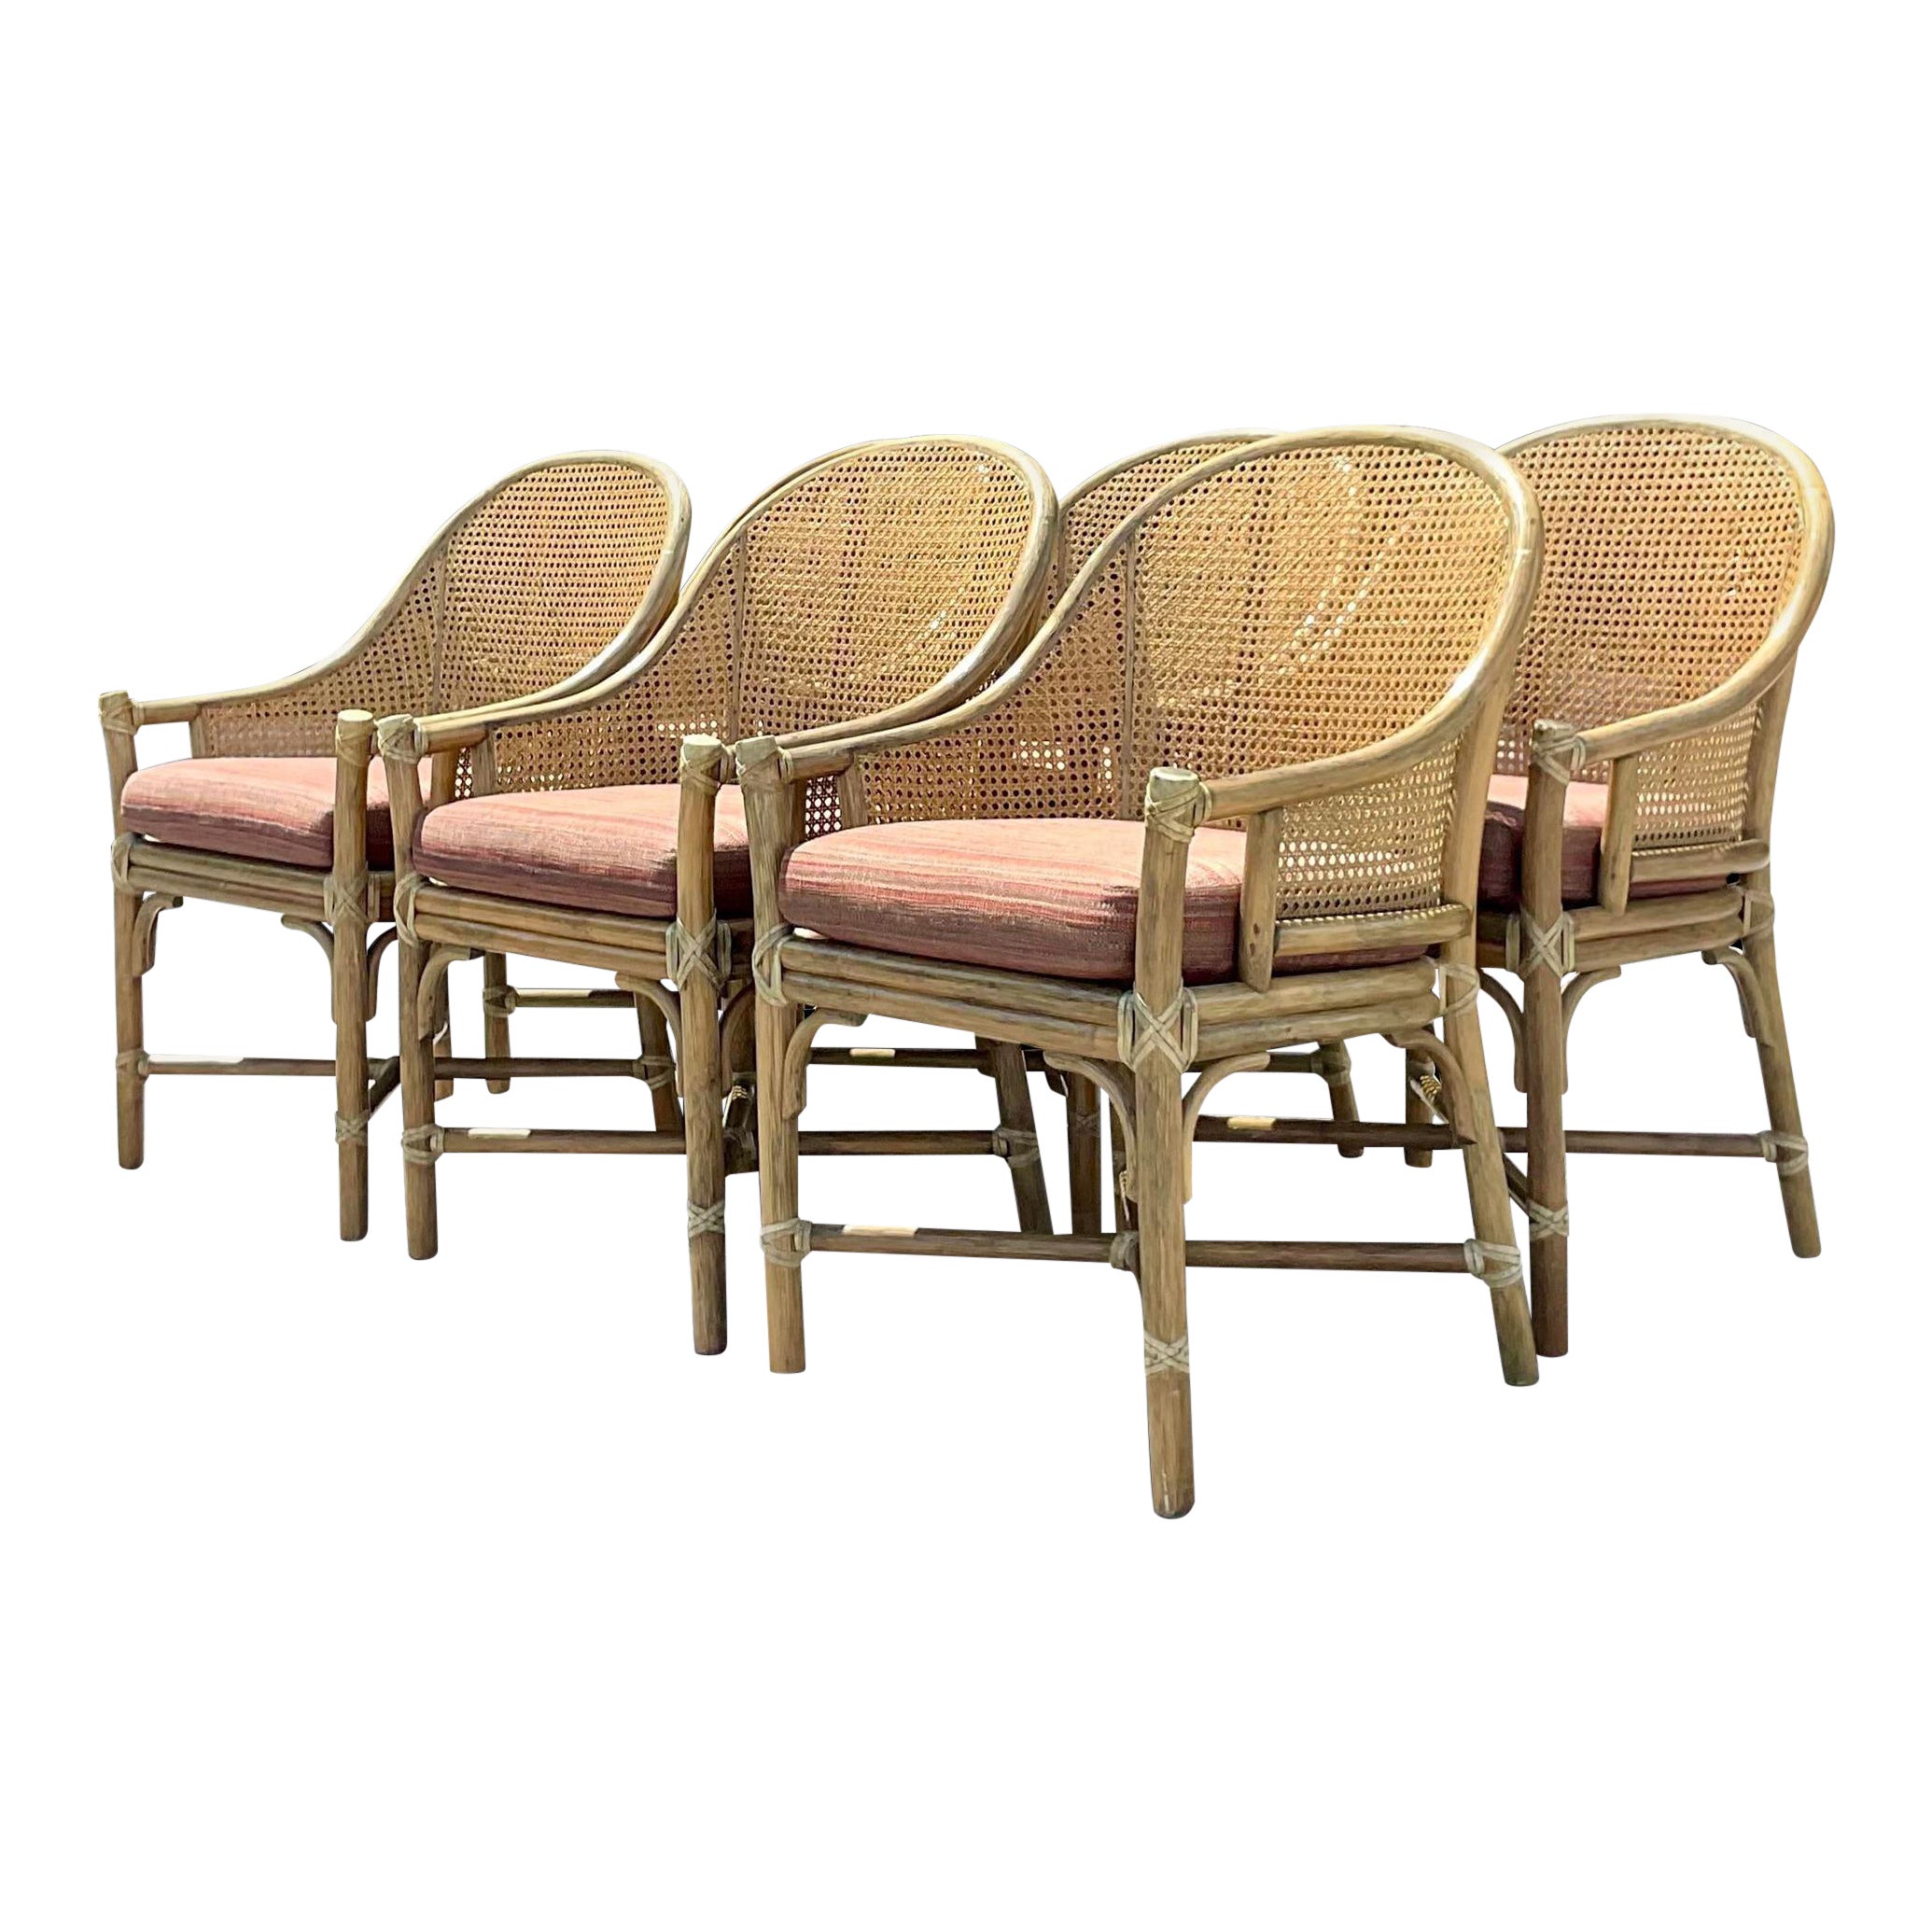 Vintage Coastal Tagged McGuire Cane Dining Chairs - Set of 6